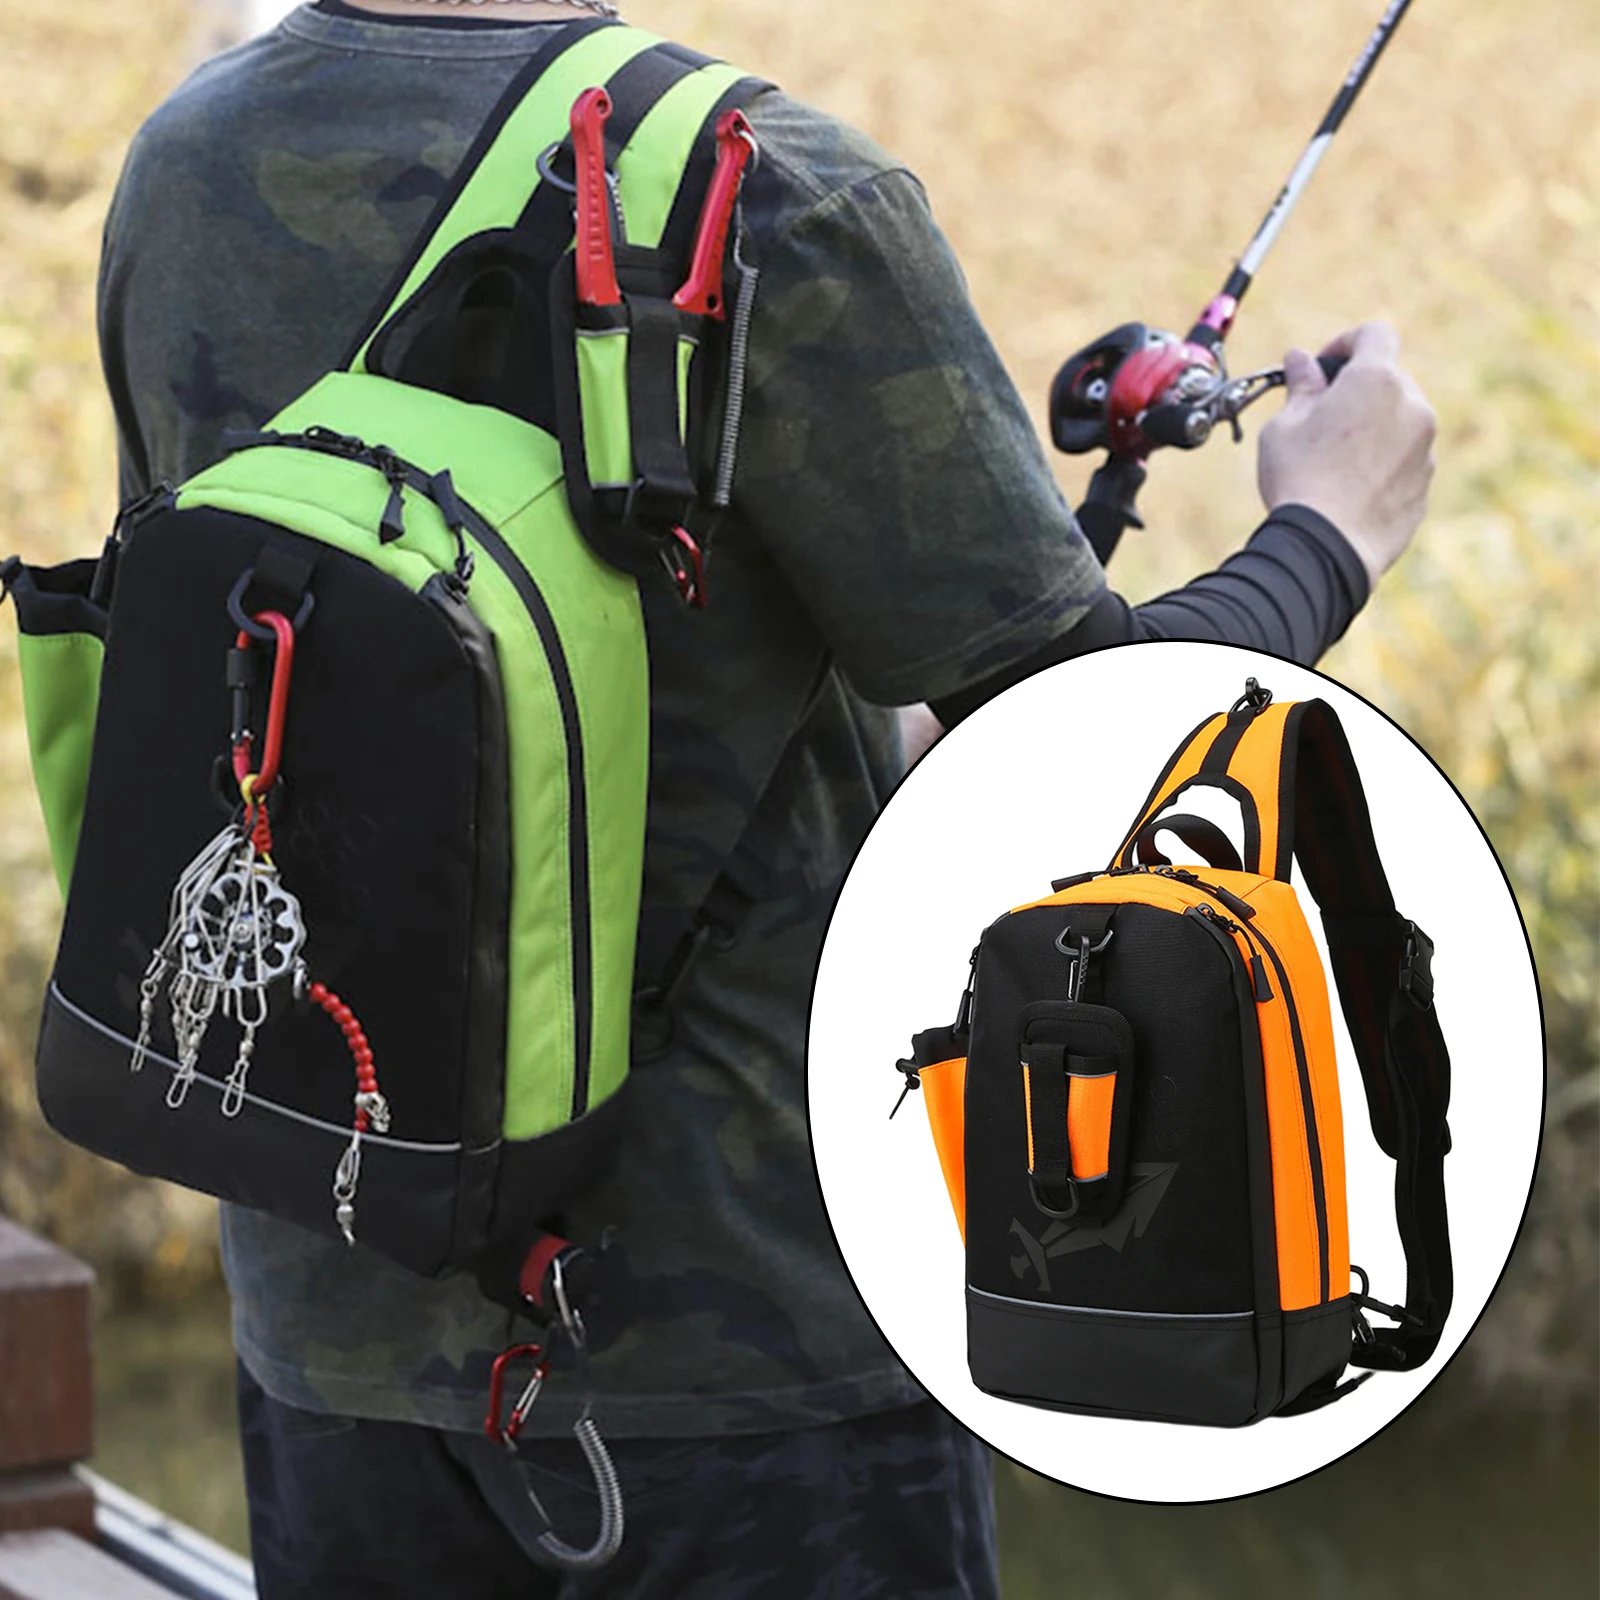 Oxford Cloth Chest Bag Hunting Fishing Bags Camping Hiking Men`s Shoulder Bag Day Pack for Travel Outdoor